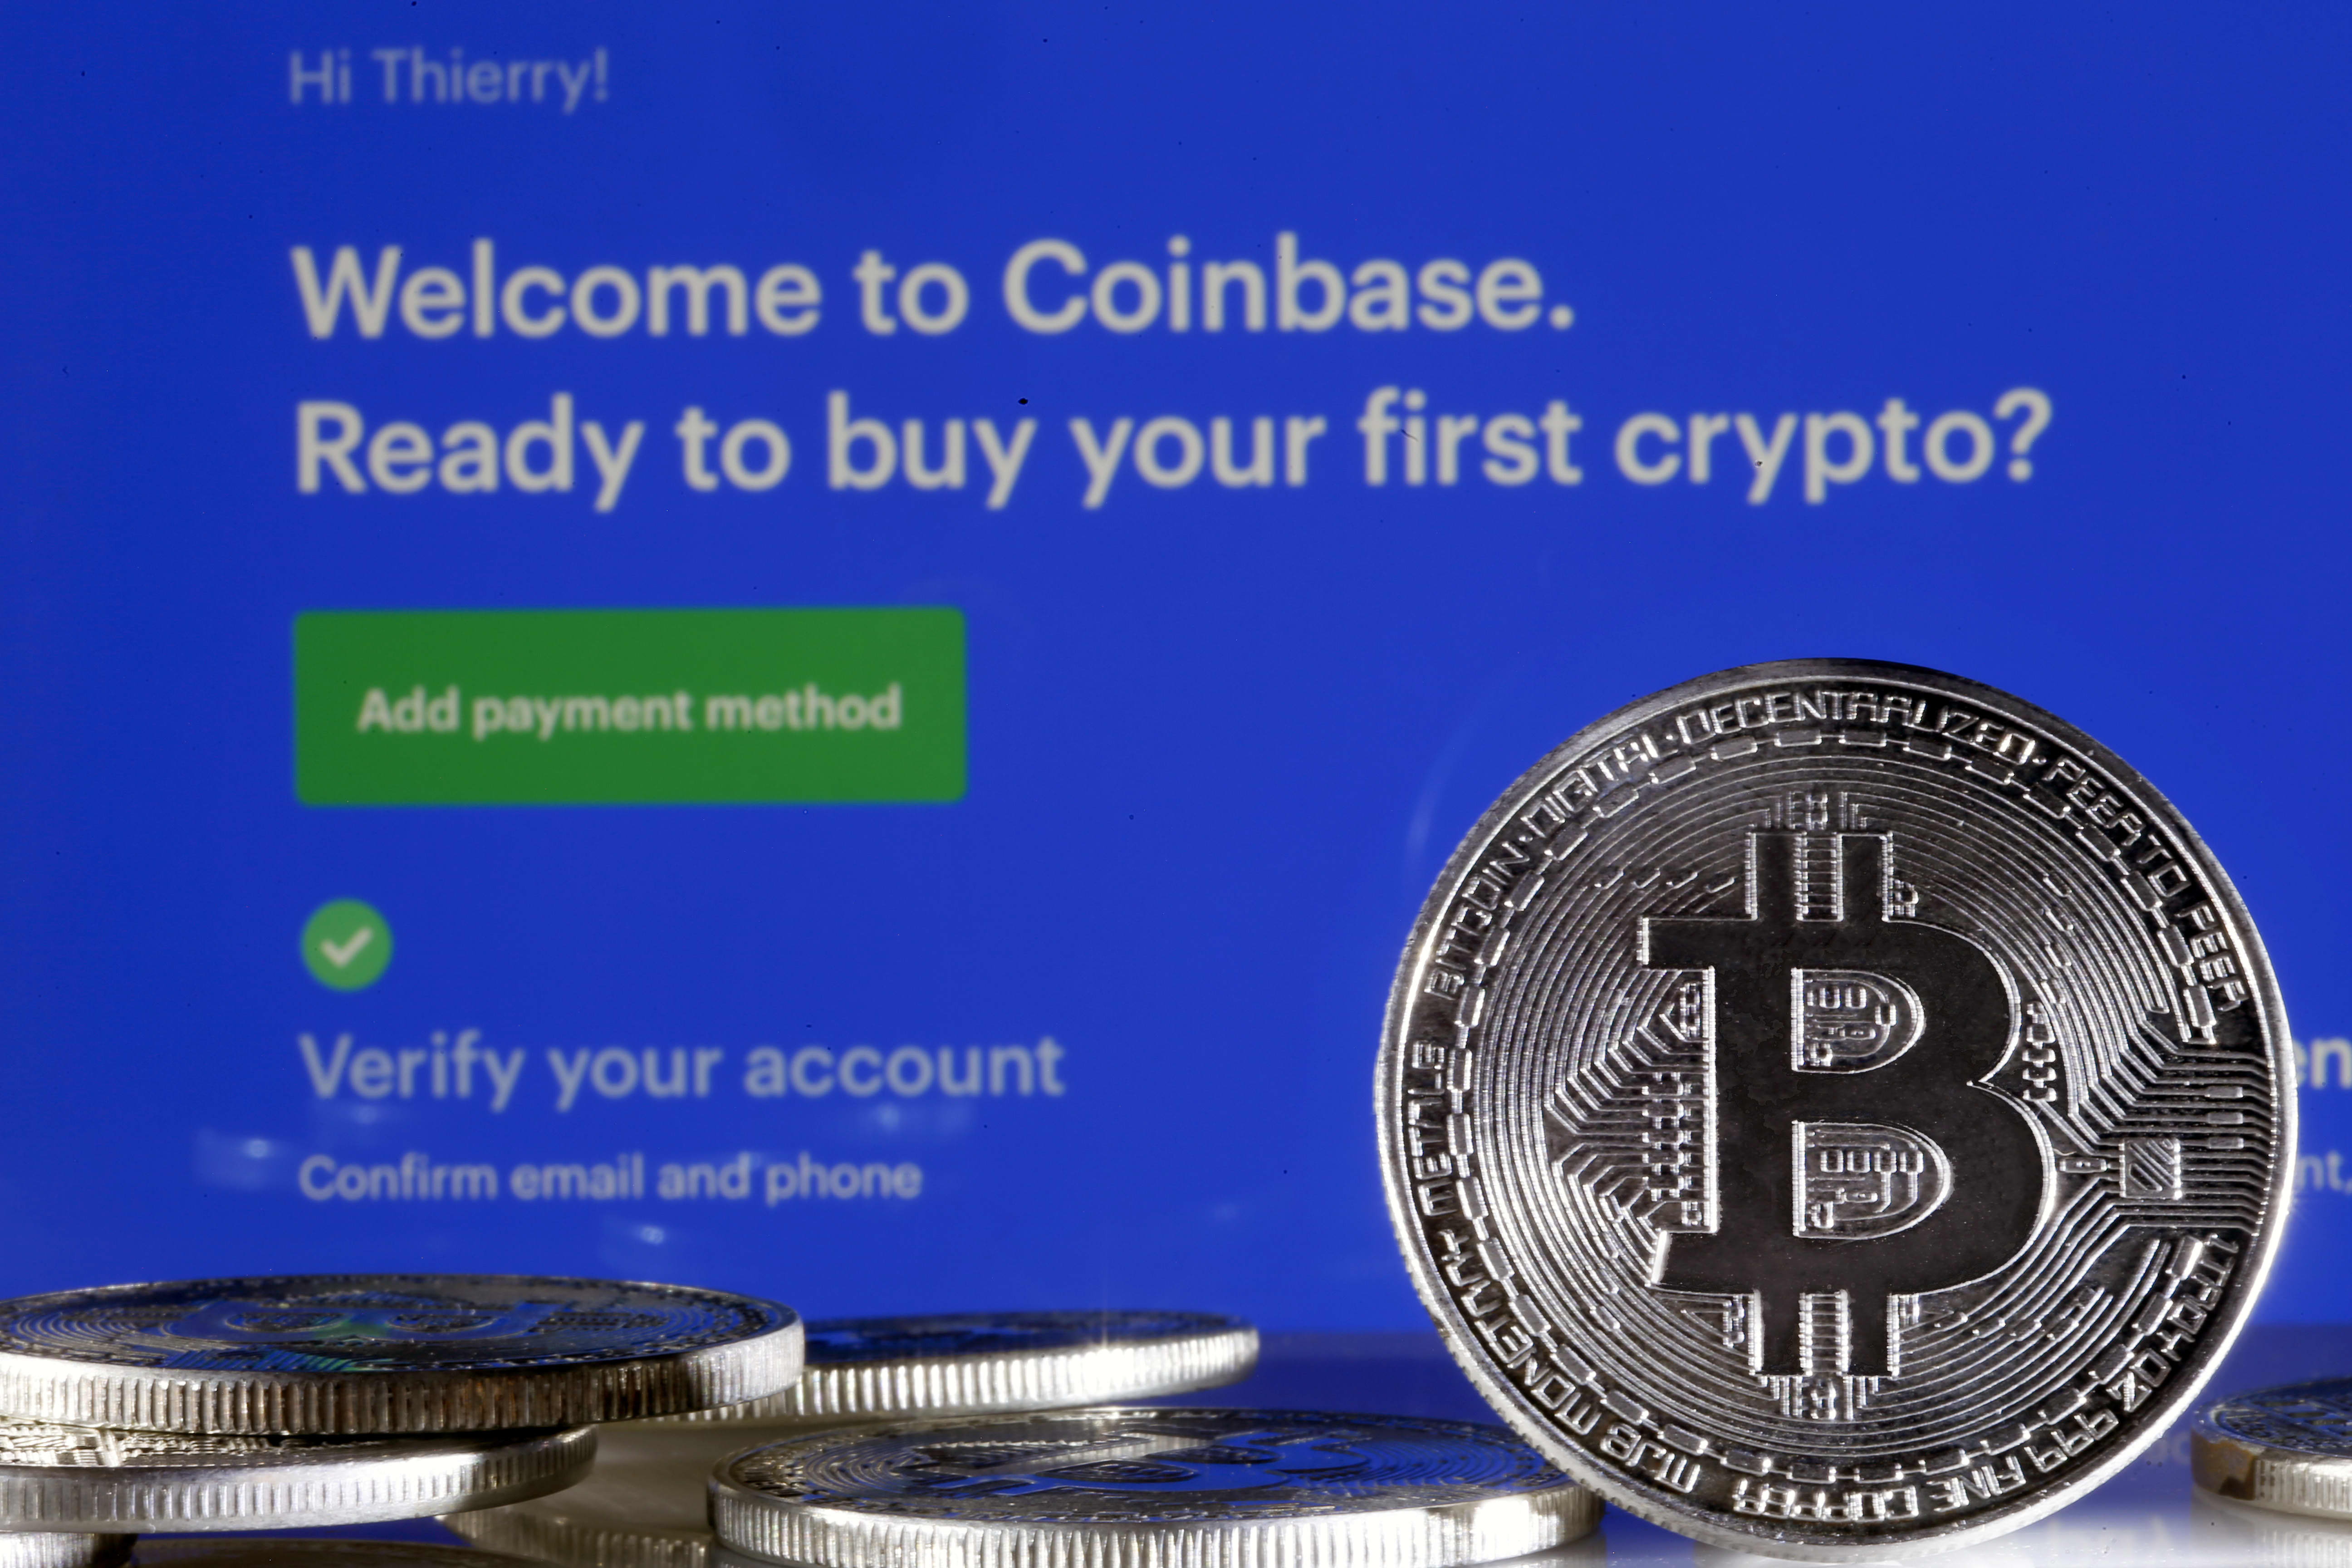 Coinbase debut is a ‘watershed’ for crypto, but there are risks ahead